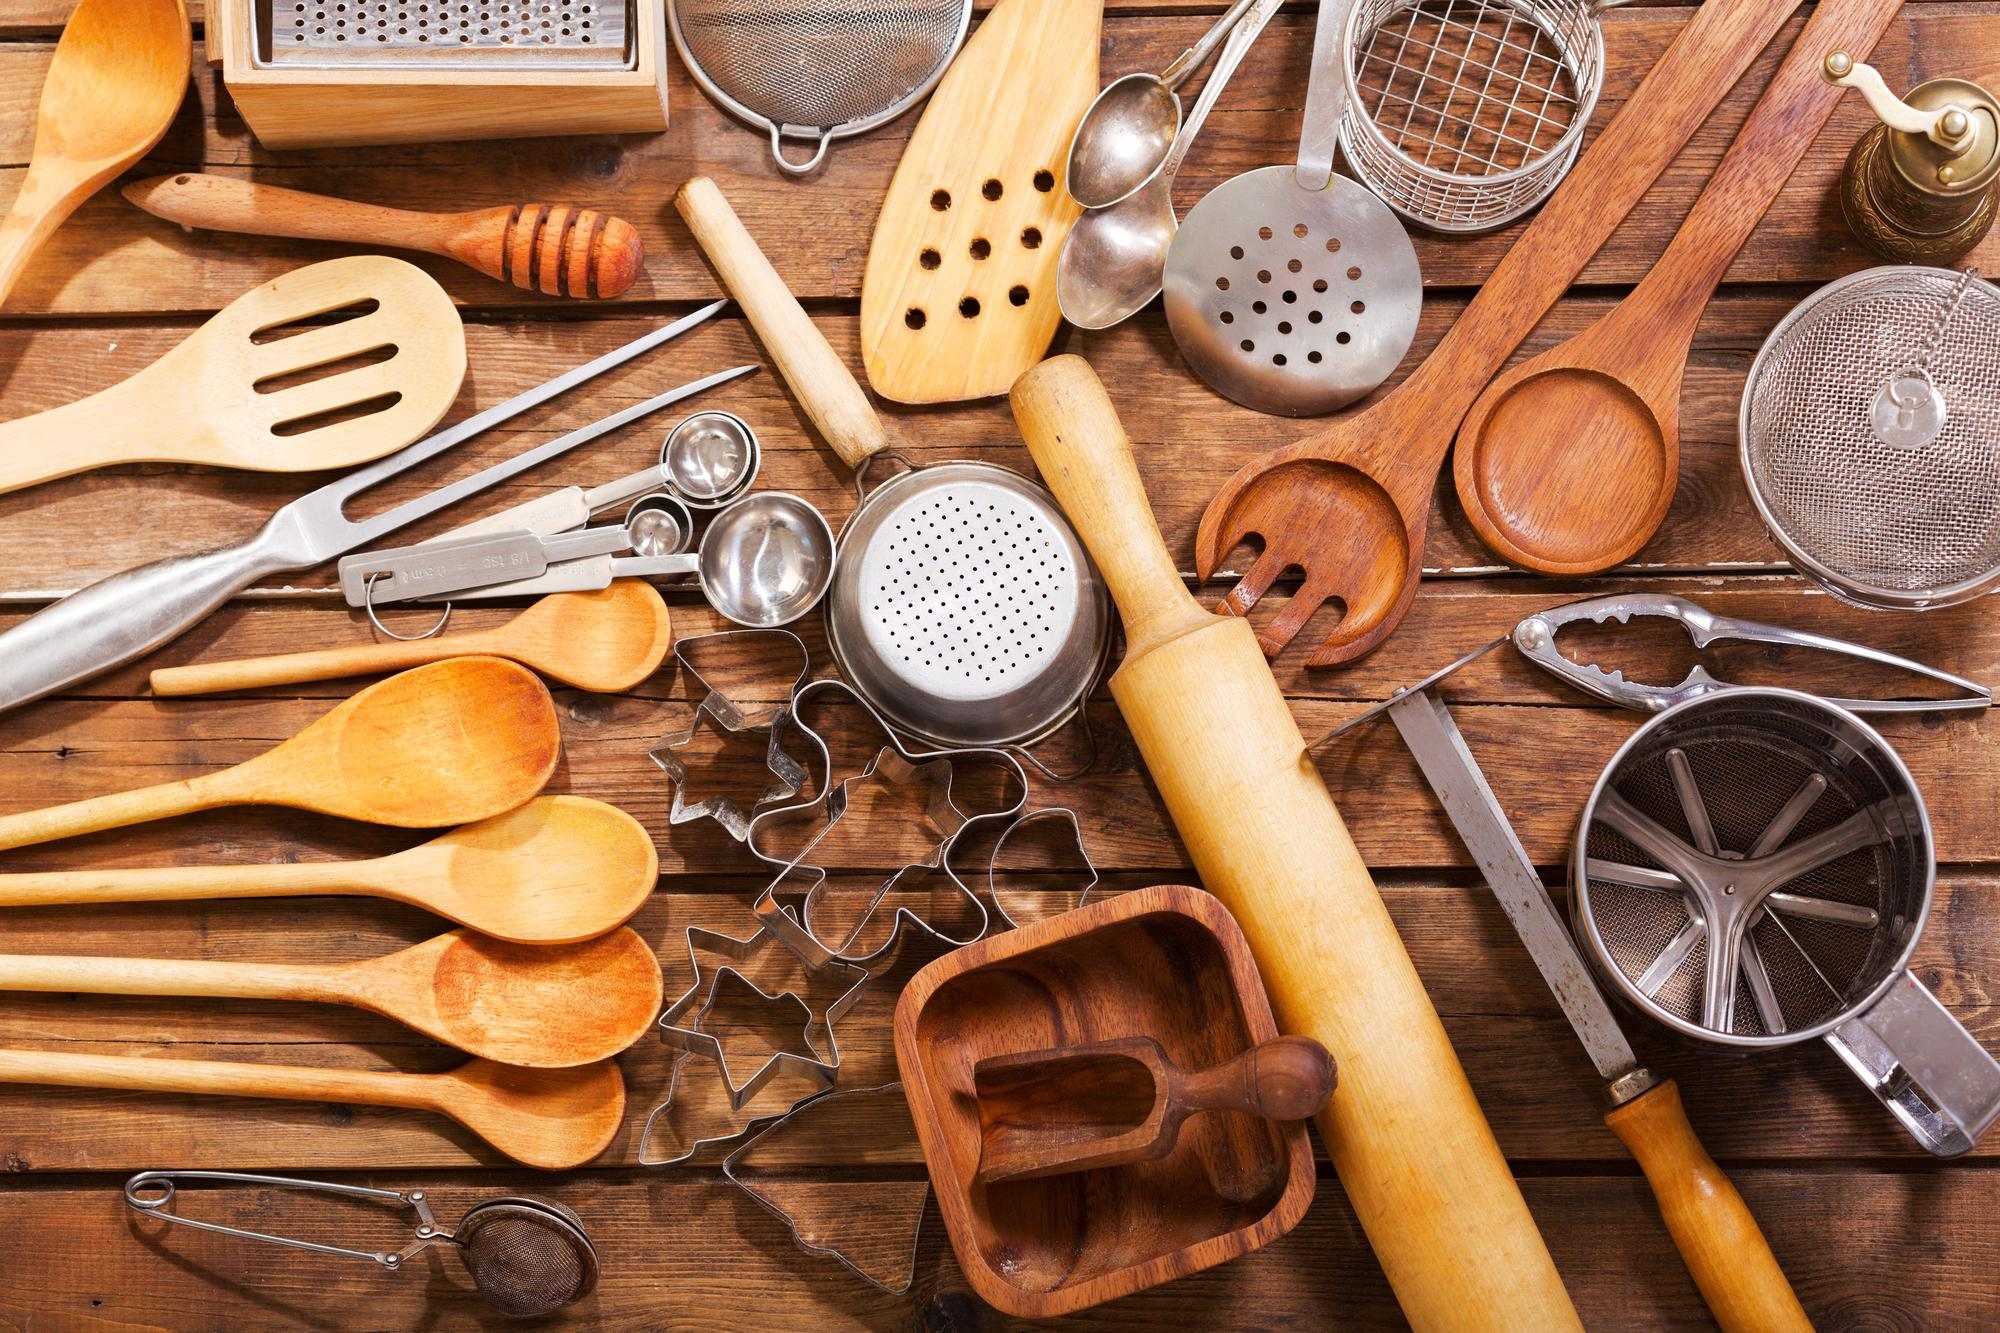 kitchen-essentials-tools-and-utensils-you-must-have-in-your-kitchen